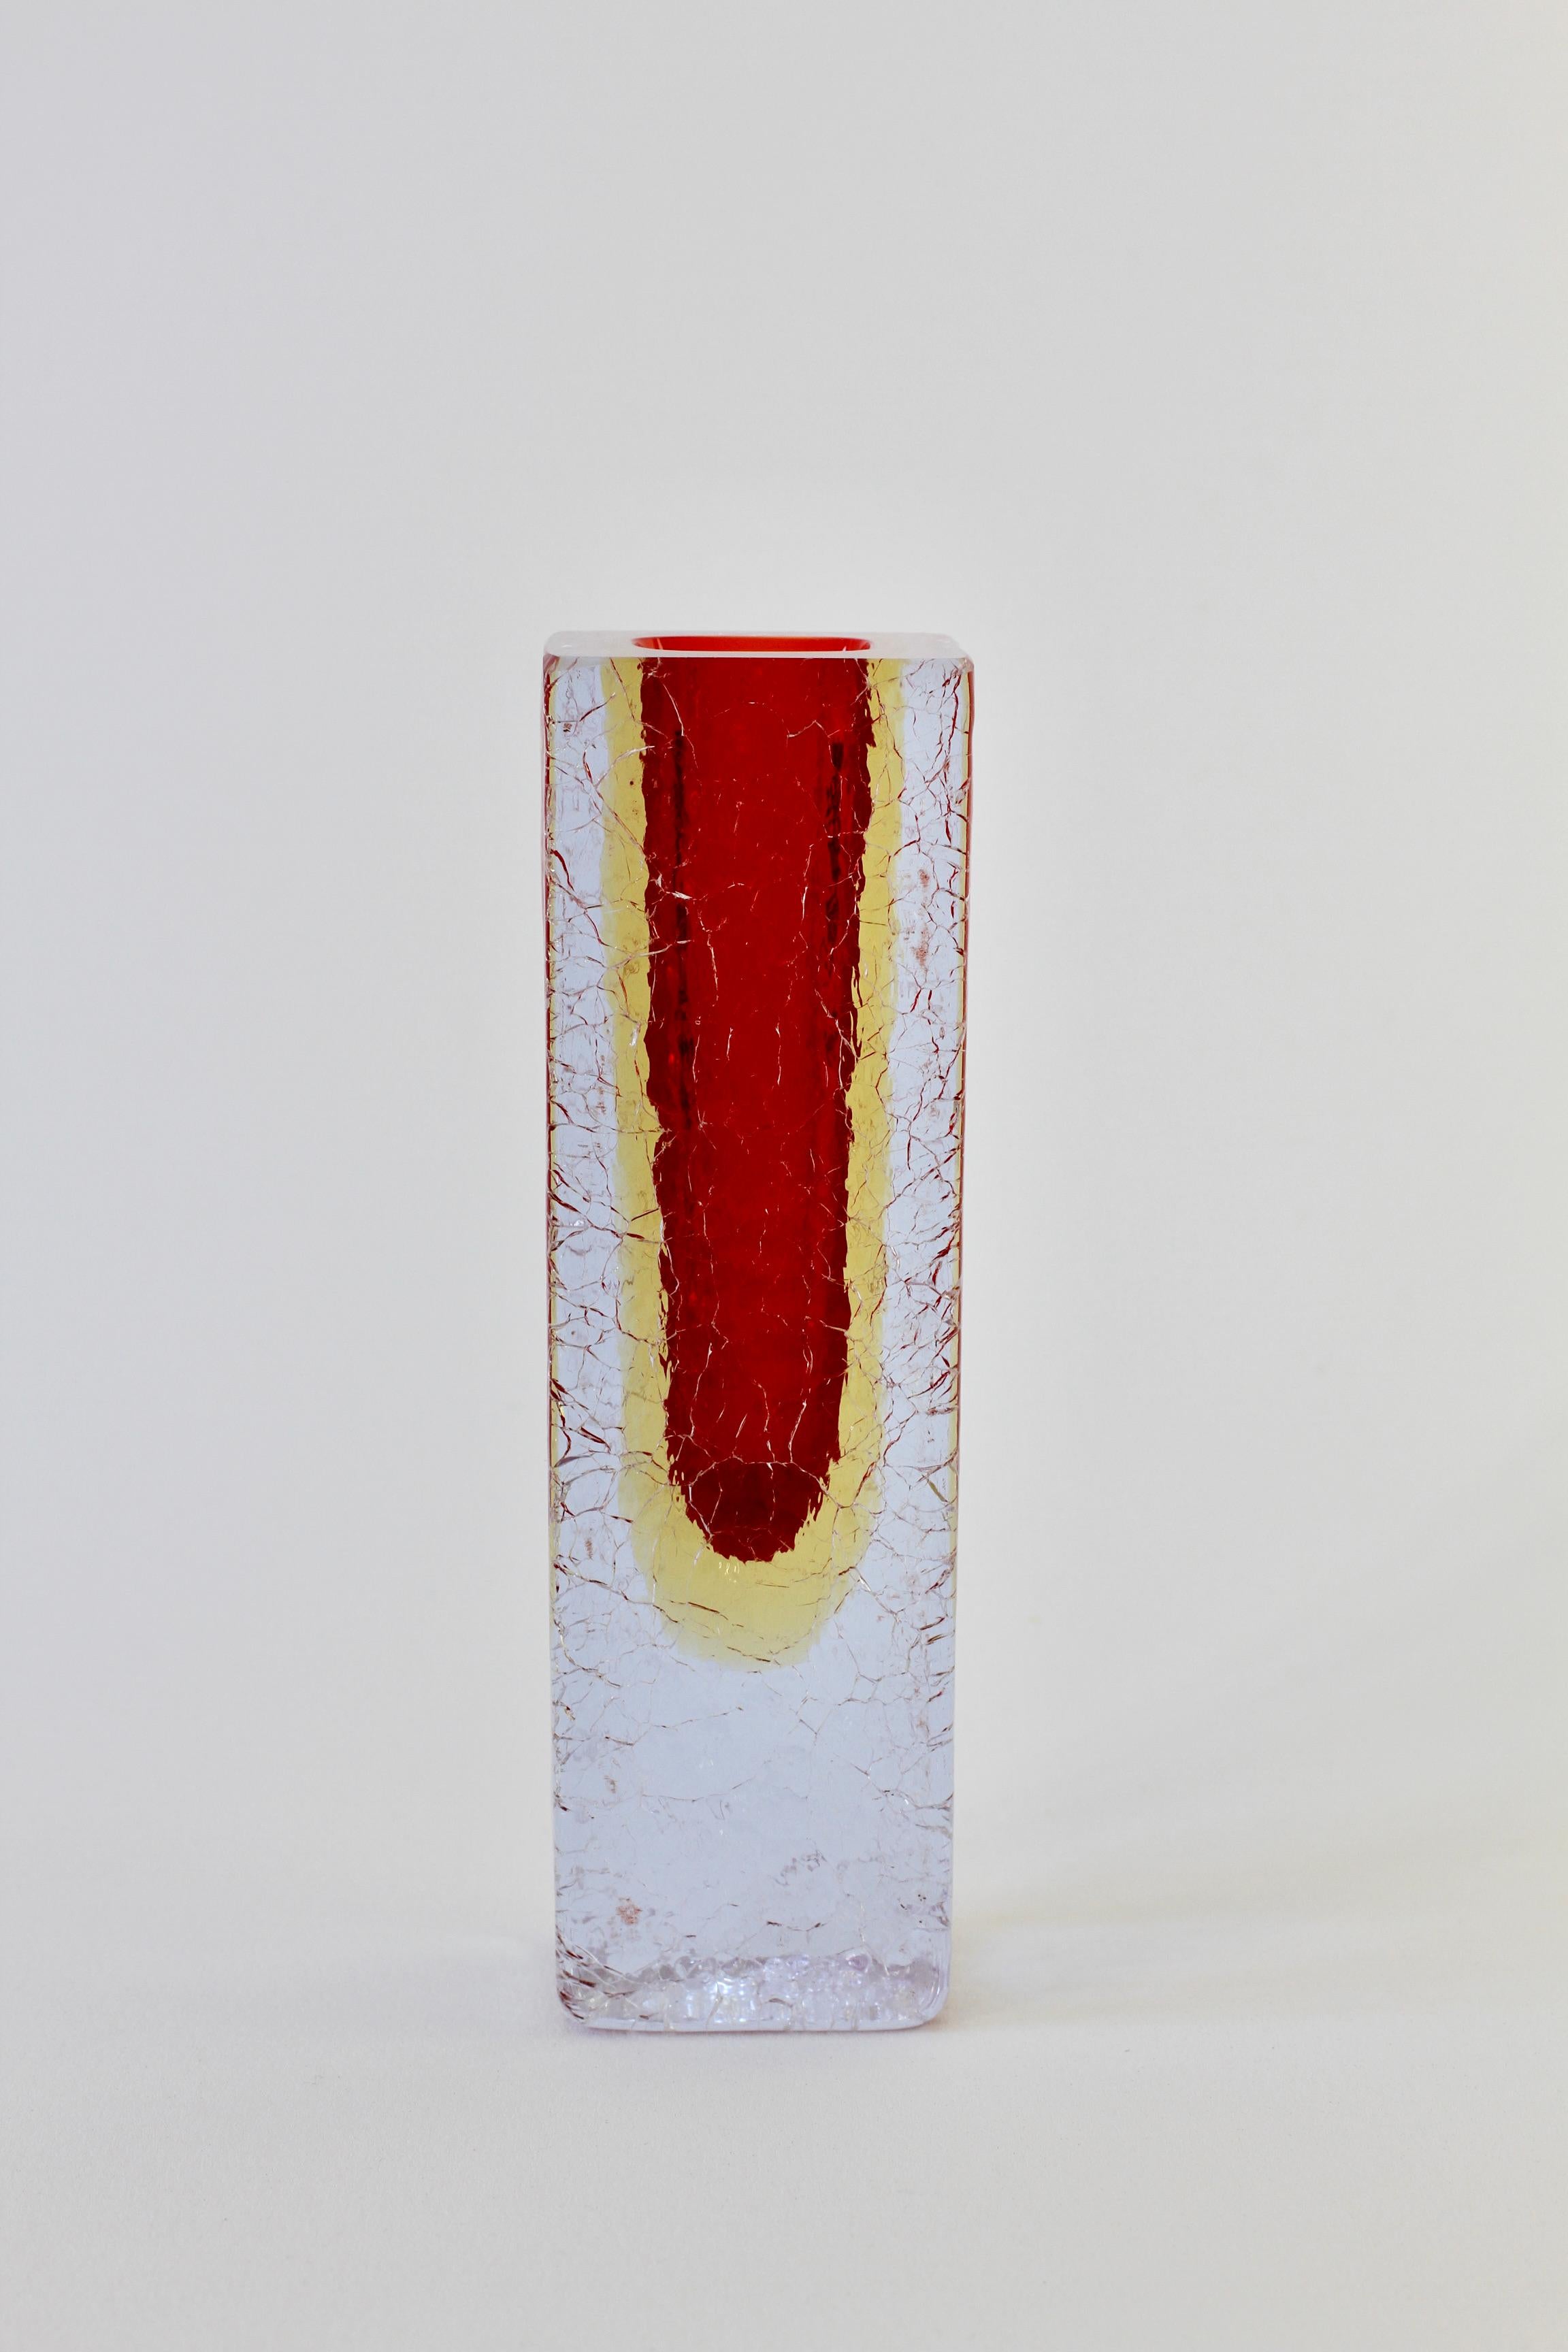 Blown Glass Faceted Red & Yellow Italian Murano 'Sommerso' Crackle Glass Vase, circa 1960s For Sale